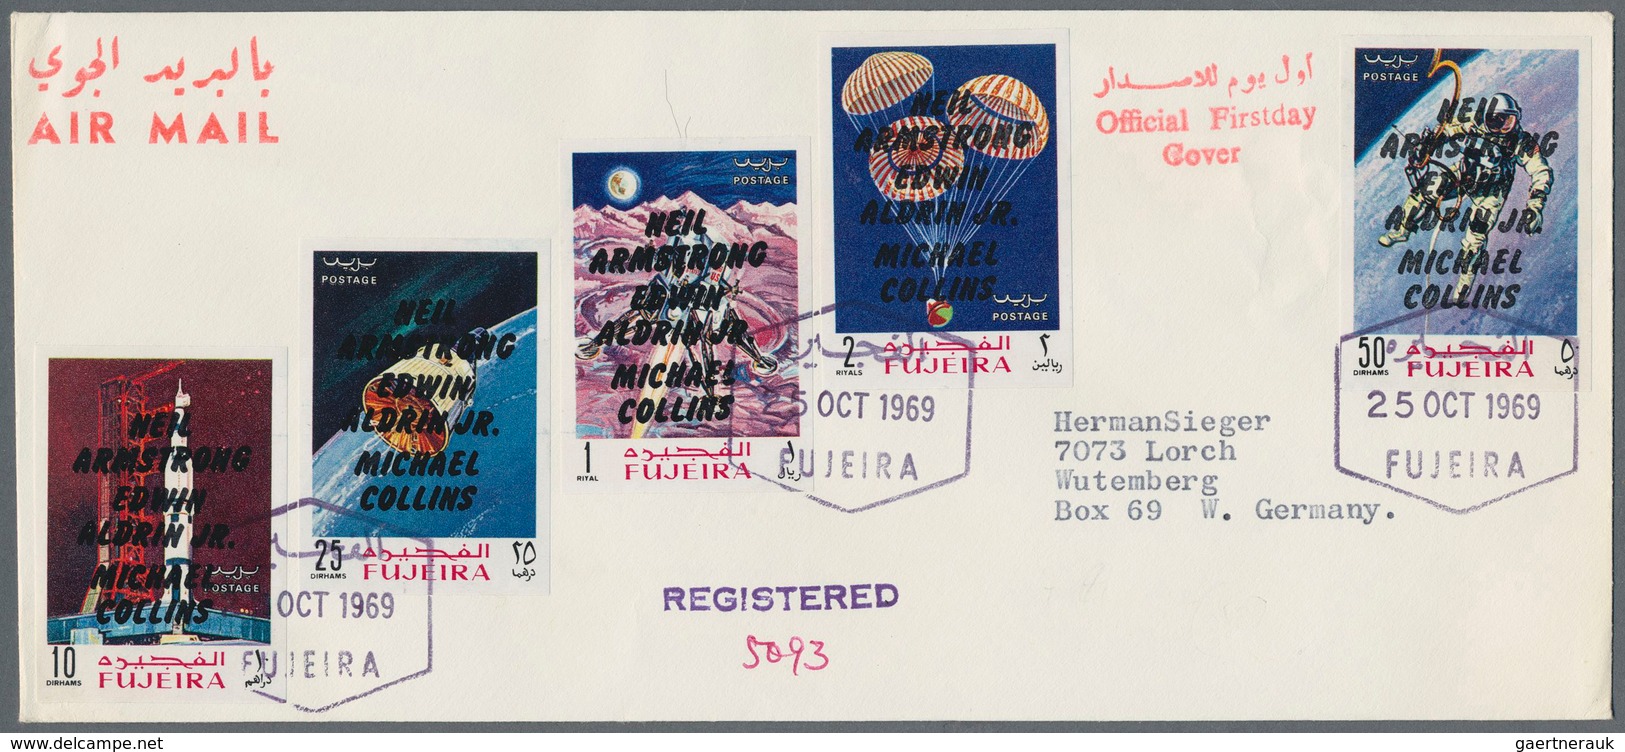 22607 Fudschaira / Fujeira: 1969, APOLLO, group of 18 covers: Michel nos. 399/407 A and A 399/407 A on fou